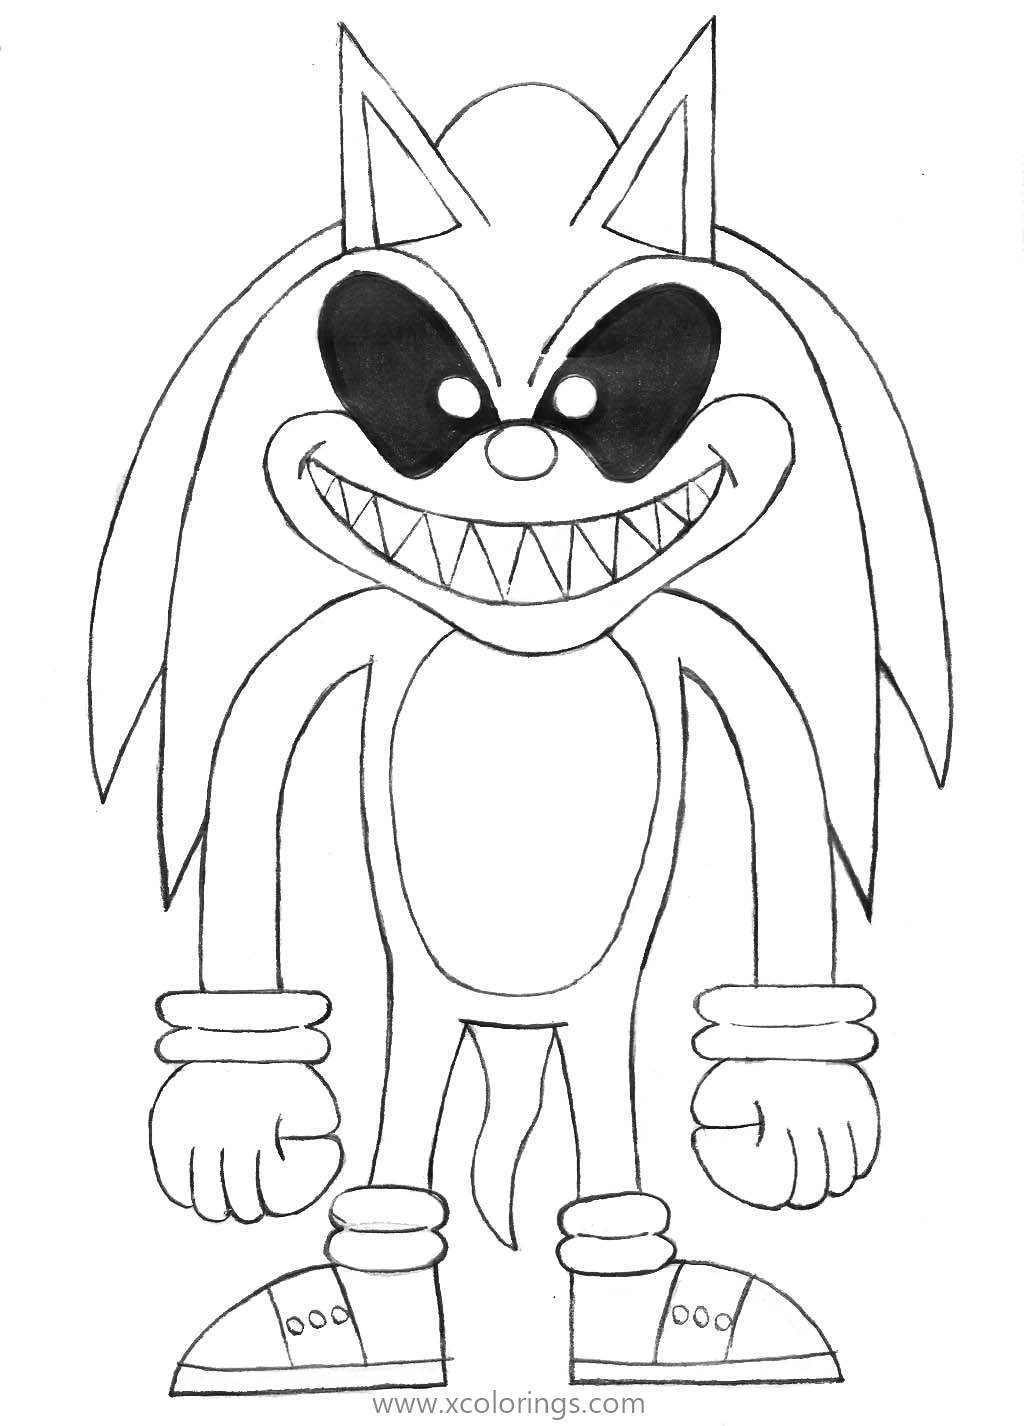 Sonic Exe Coloring Pages by horrorshowfrea XColorings com